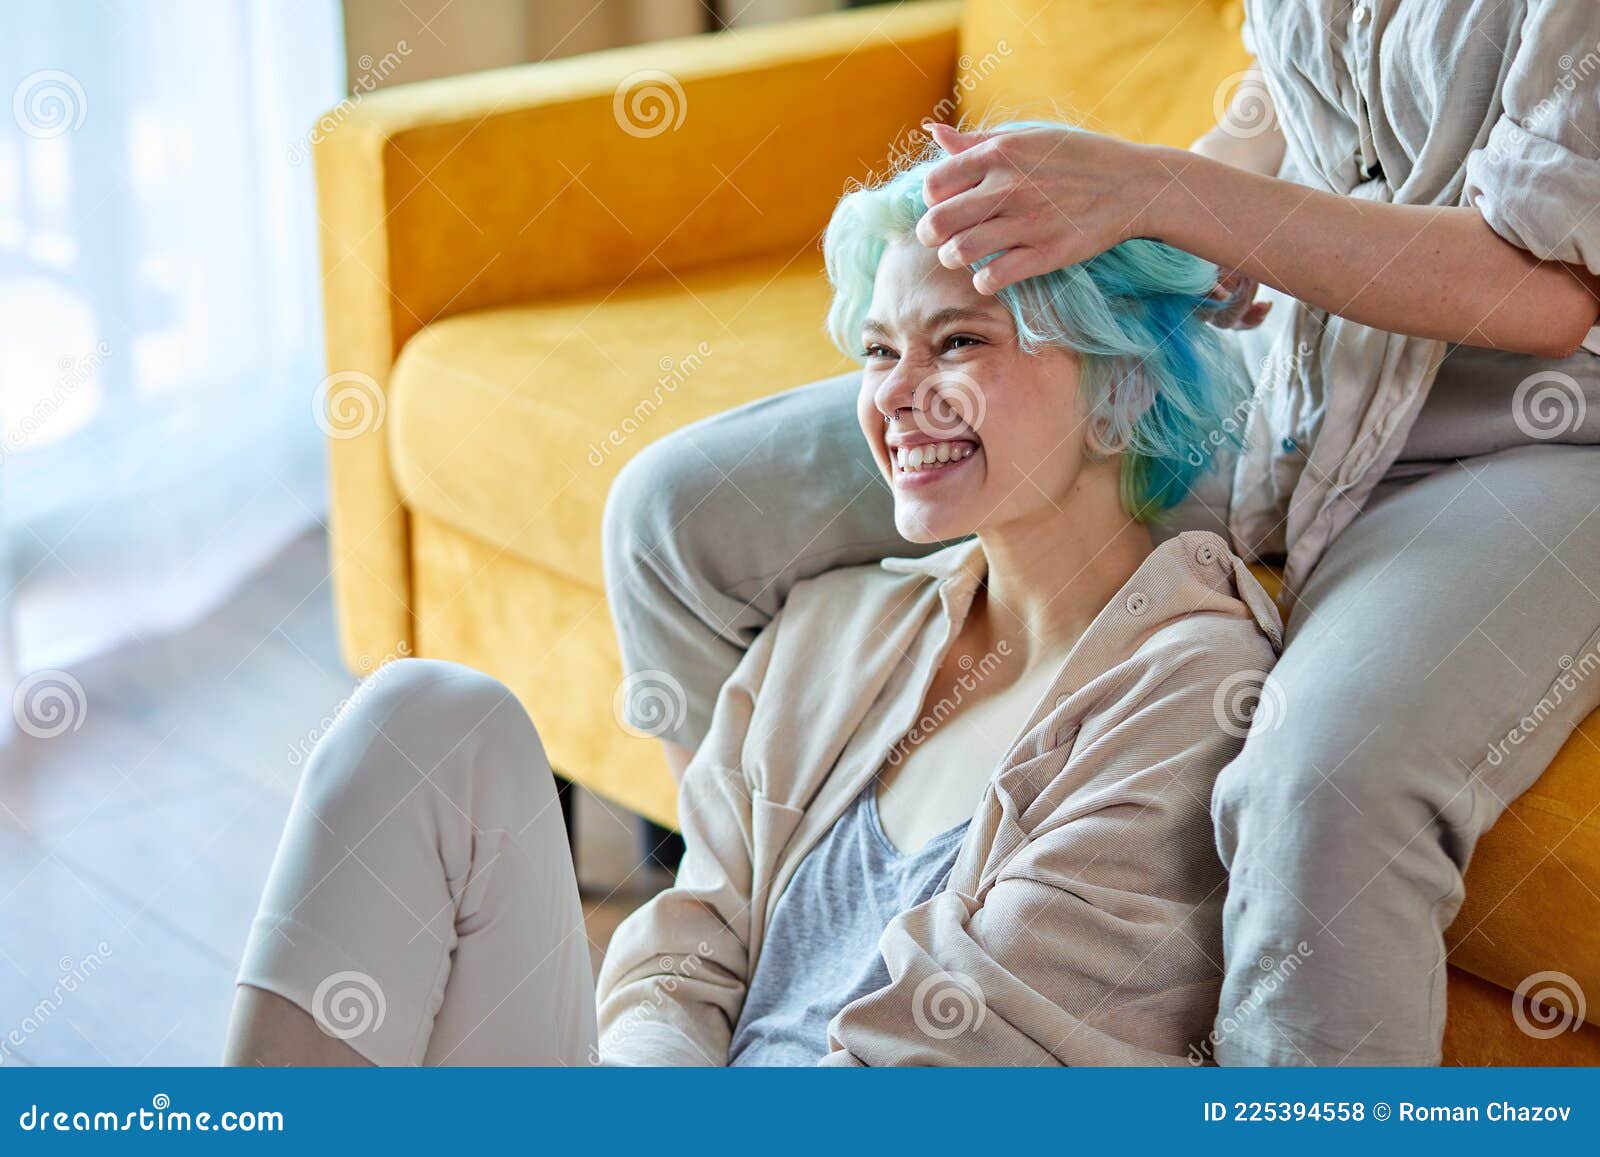 Portrait Of Positive Lesbian Couple Having Fun In Bright Cozy Room Together Lgbt Concept Stock